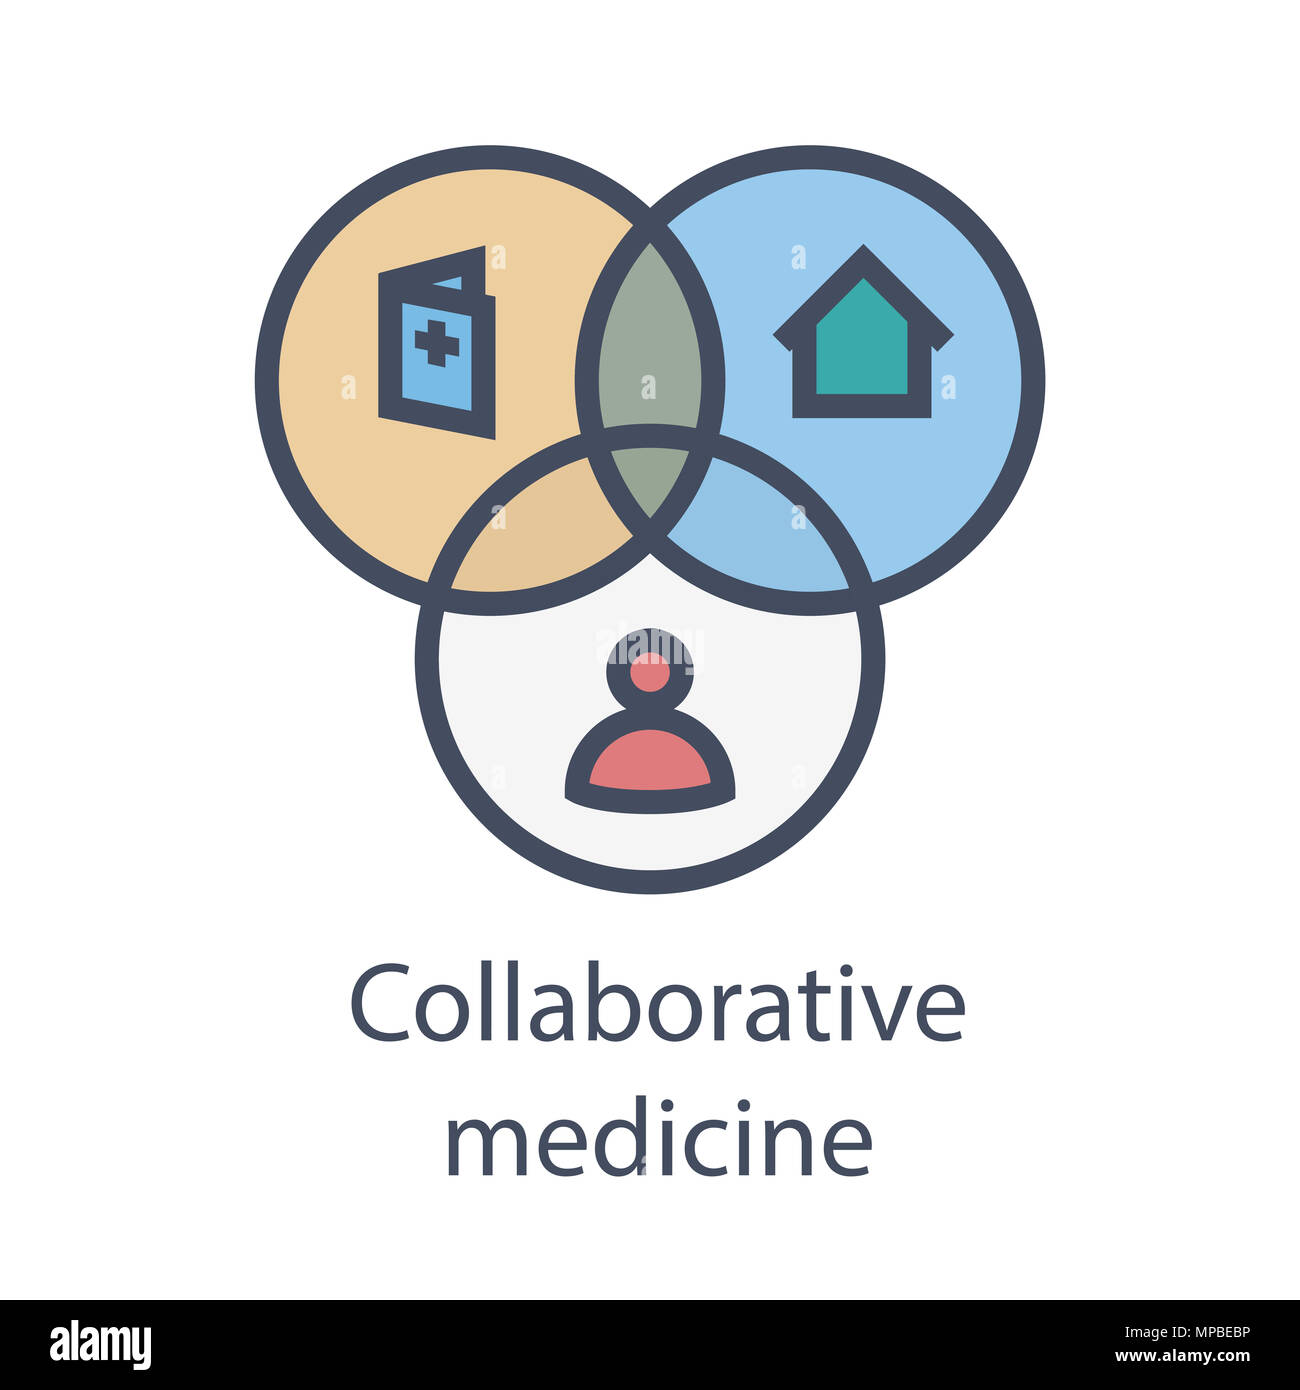 Collaborative medicine w EHR, PHR, or EMR - doctors, patients, and hospital communication Stock Photo